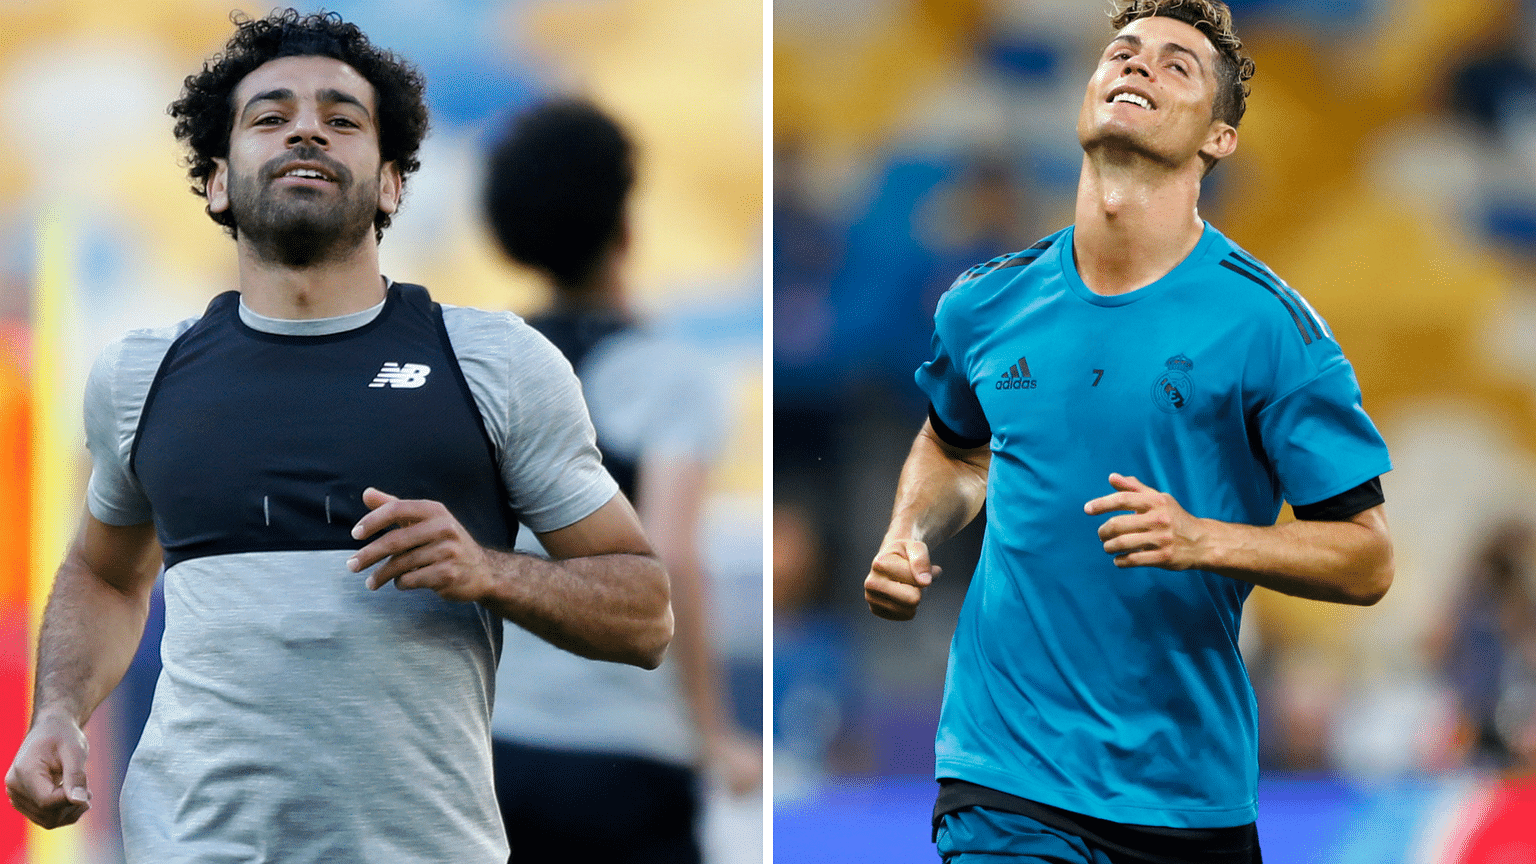 Liverpool’s Mo Salah (left) and Real Madrid’s Cristiano Ronaldo during practice sessions at the Olimpiyskiy Stadium in Kiev in Ukraine on Friday.&nbsp;